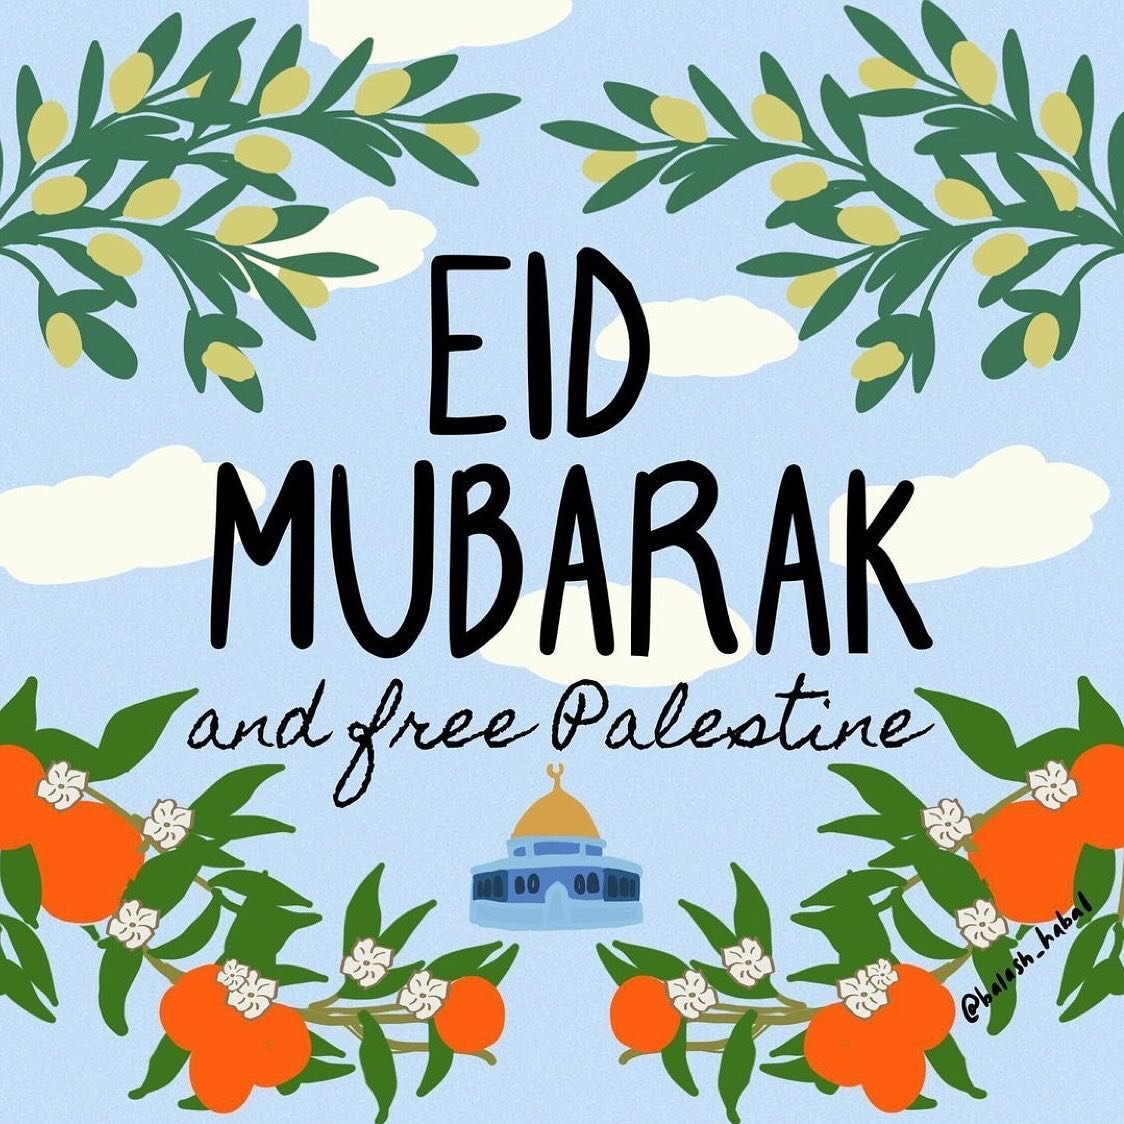 Eid Mubarak to our Muslim brothers and sisters. And Free Palestine 🇵🇸 

Beautiful artwork. Reposting @balash_habal: 

I prayed salat el eid this morning with a heavy heart. It&rsquo;s hard to feel the joy I typically feel on eid morning knowing tha